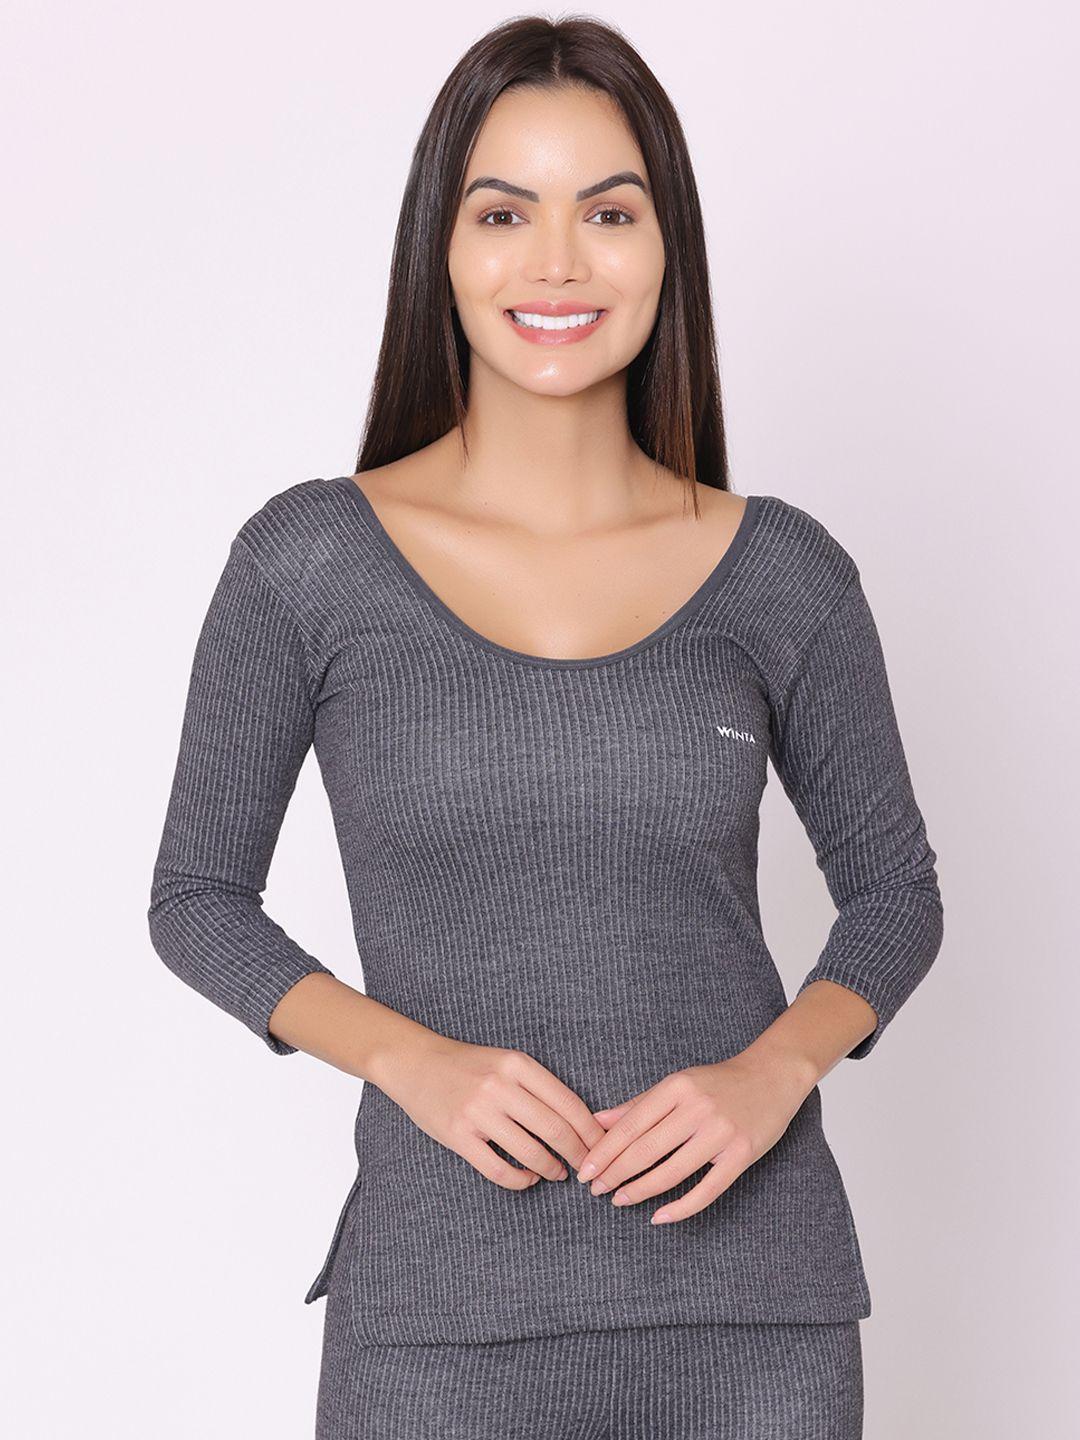 groversons paris beauty women grey solid thermal top